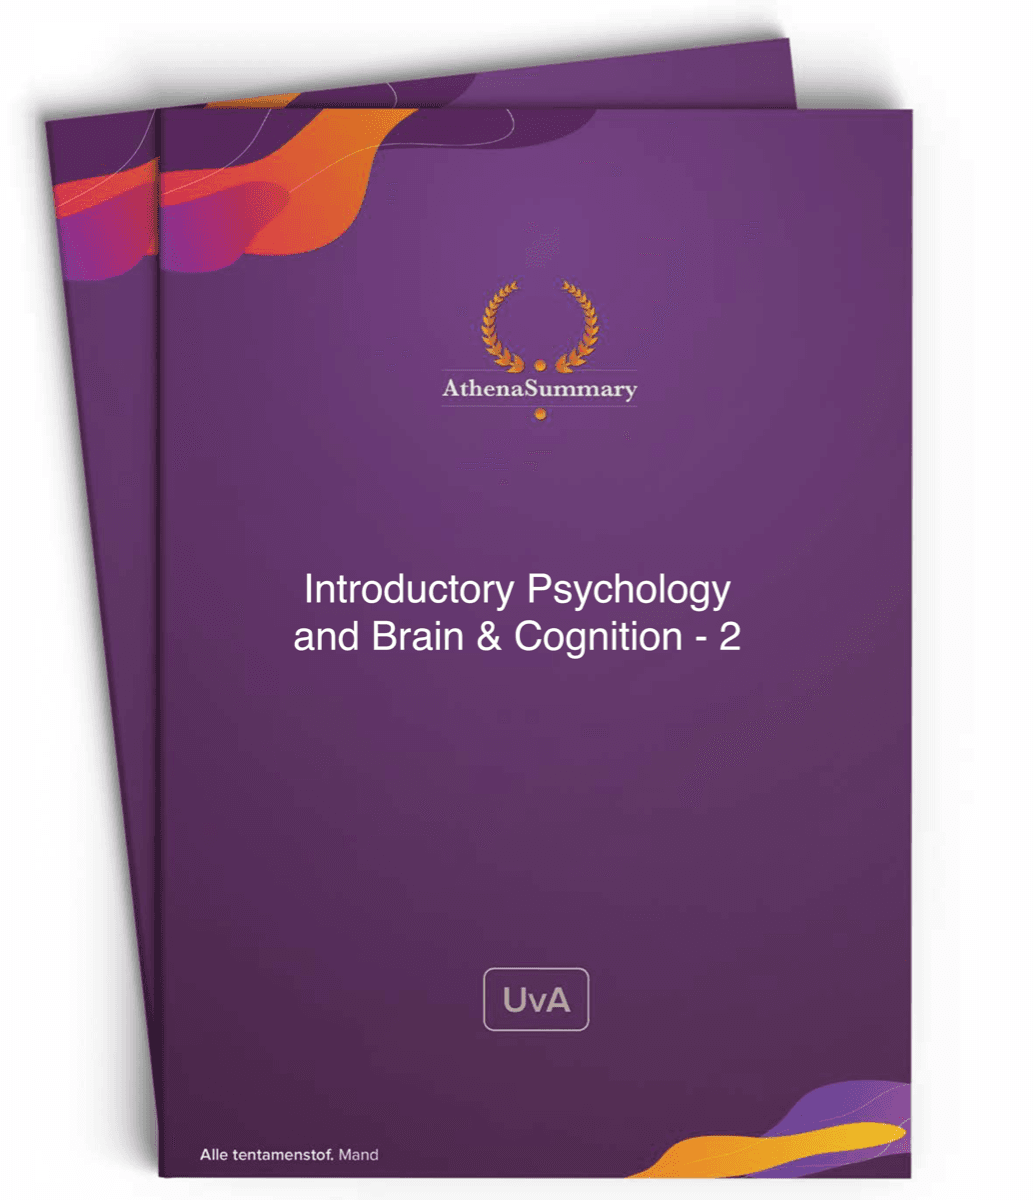 Literature Summary: Introductory Psychology and Brain & Cognition - 2